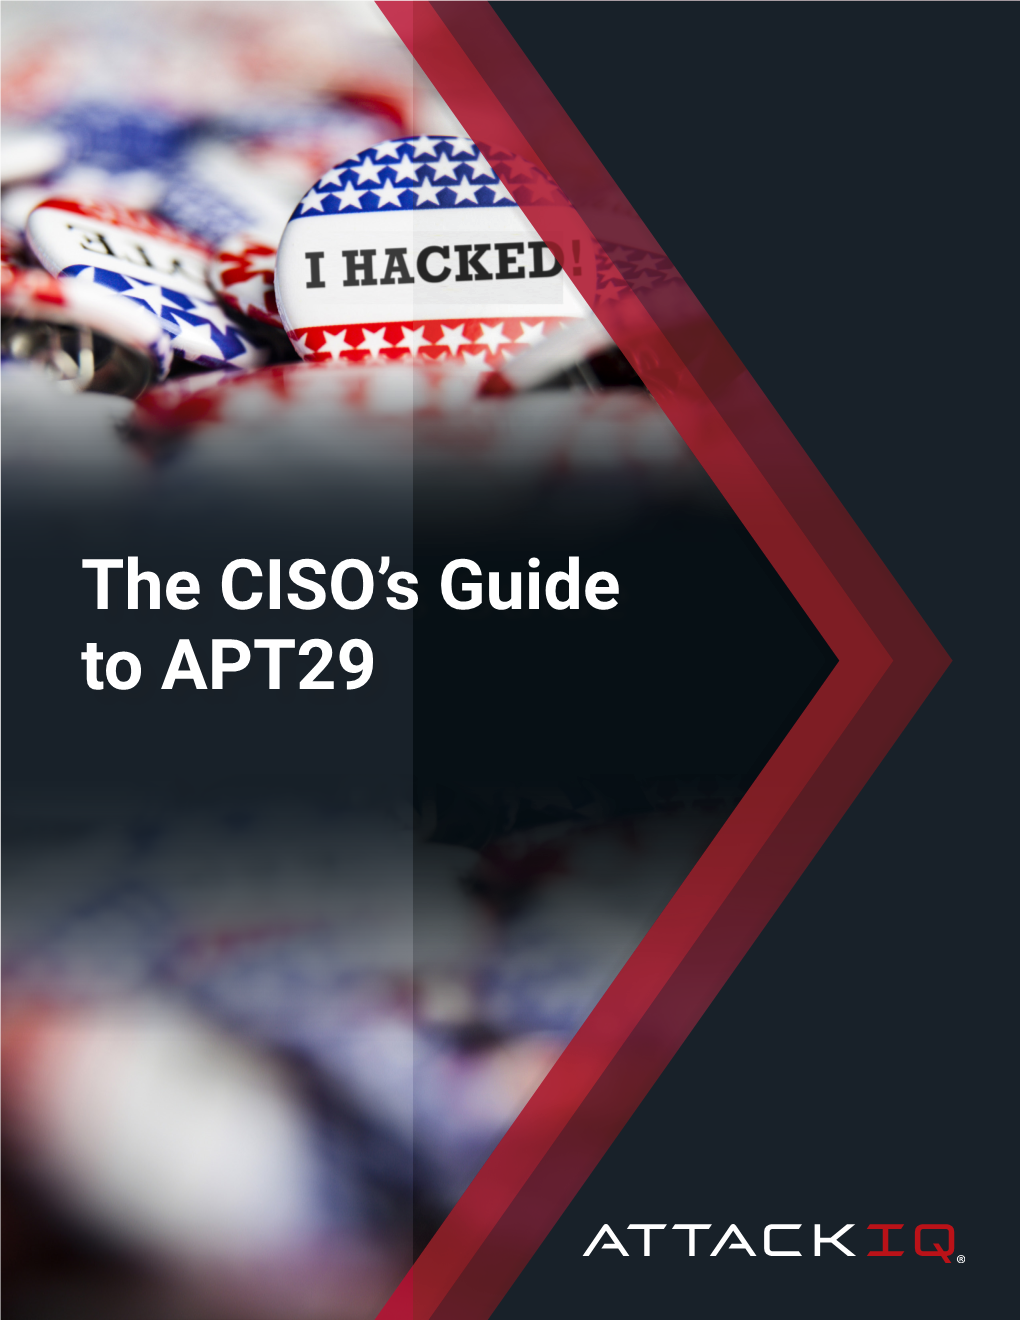 The CISO's Guide to APT29